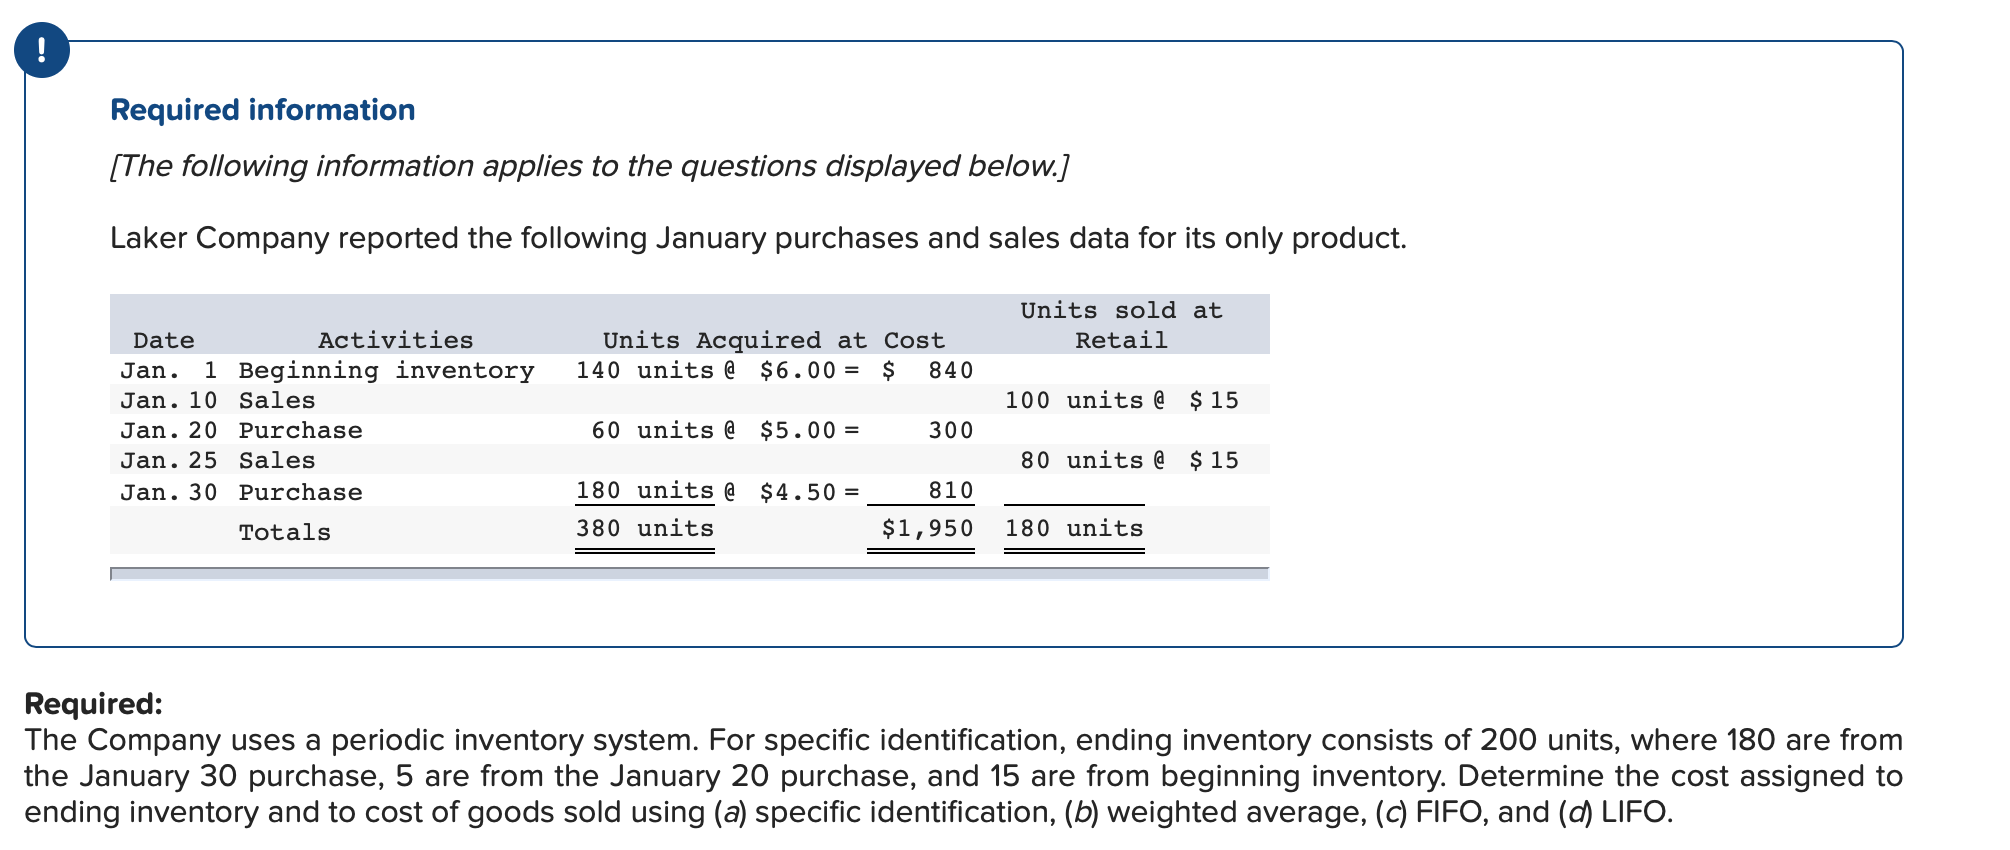 Required information
[The following information applies to the questions displayed below.]
Laker Company reported the following January purchases and sales data for its only product.
Units sold at
Activities
Units Acquired at Cost
140 units $6.00 = $
Retail
Date
1 Beginning inventory
840
Jan
100 units @ $ 15
Jan. 10 Sales
60 units @ $5.00 =
300
Jan. 20 Purchase
80 units @ $ 15
Jan. 25 Sales
180 units @
810
$4.50
Jan. 30 Purchase
380 units
$1,950
180 units
Totals
Required:
The Company uses a periodic inventory system. For specific identification, ending inventory consists of 200 units, where 180 are from
the January 30 purchase, 5 are from the January 20 purchase, and 15 are from beginning inventory. Determine the cost assigned to
ending inventory and to cost of goods sold using (a) specific identification, (b) weighted average, (c) FIFO, and (d) LIFO
